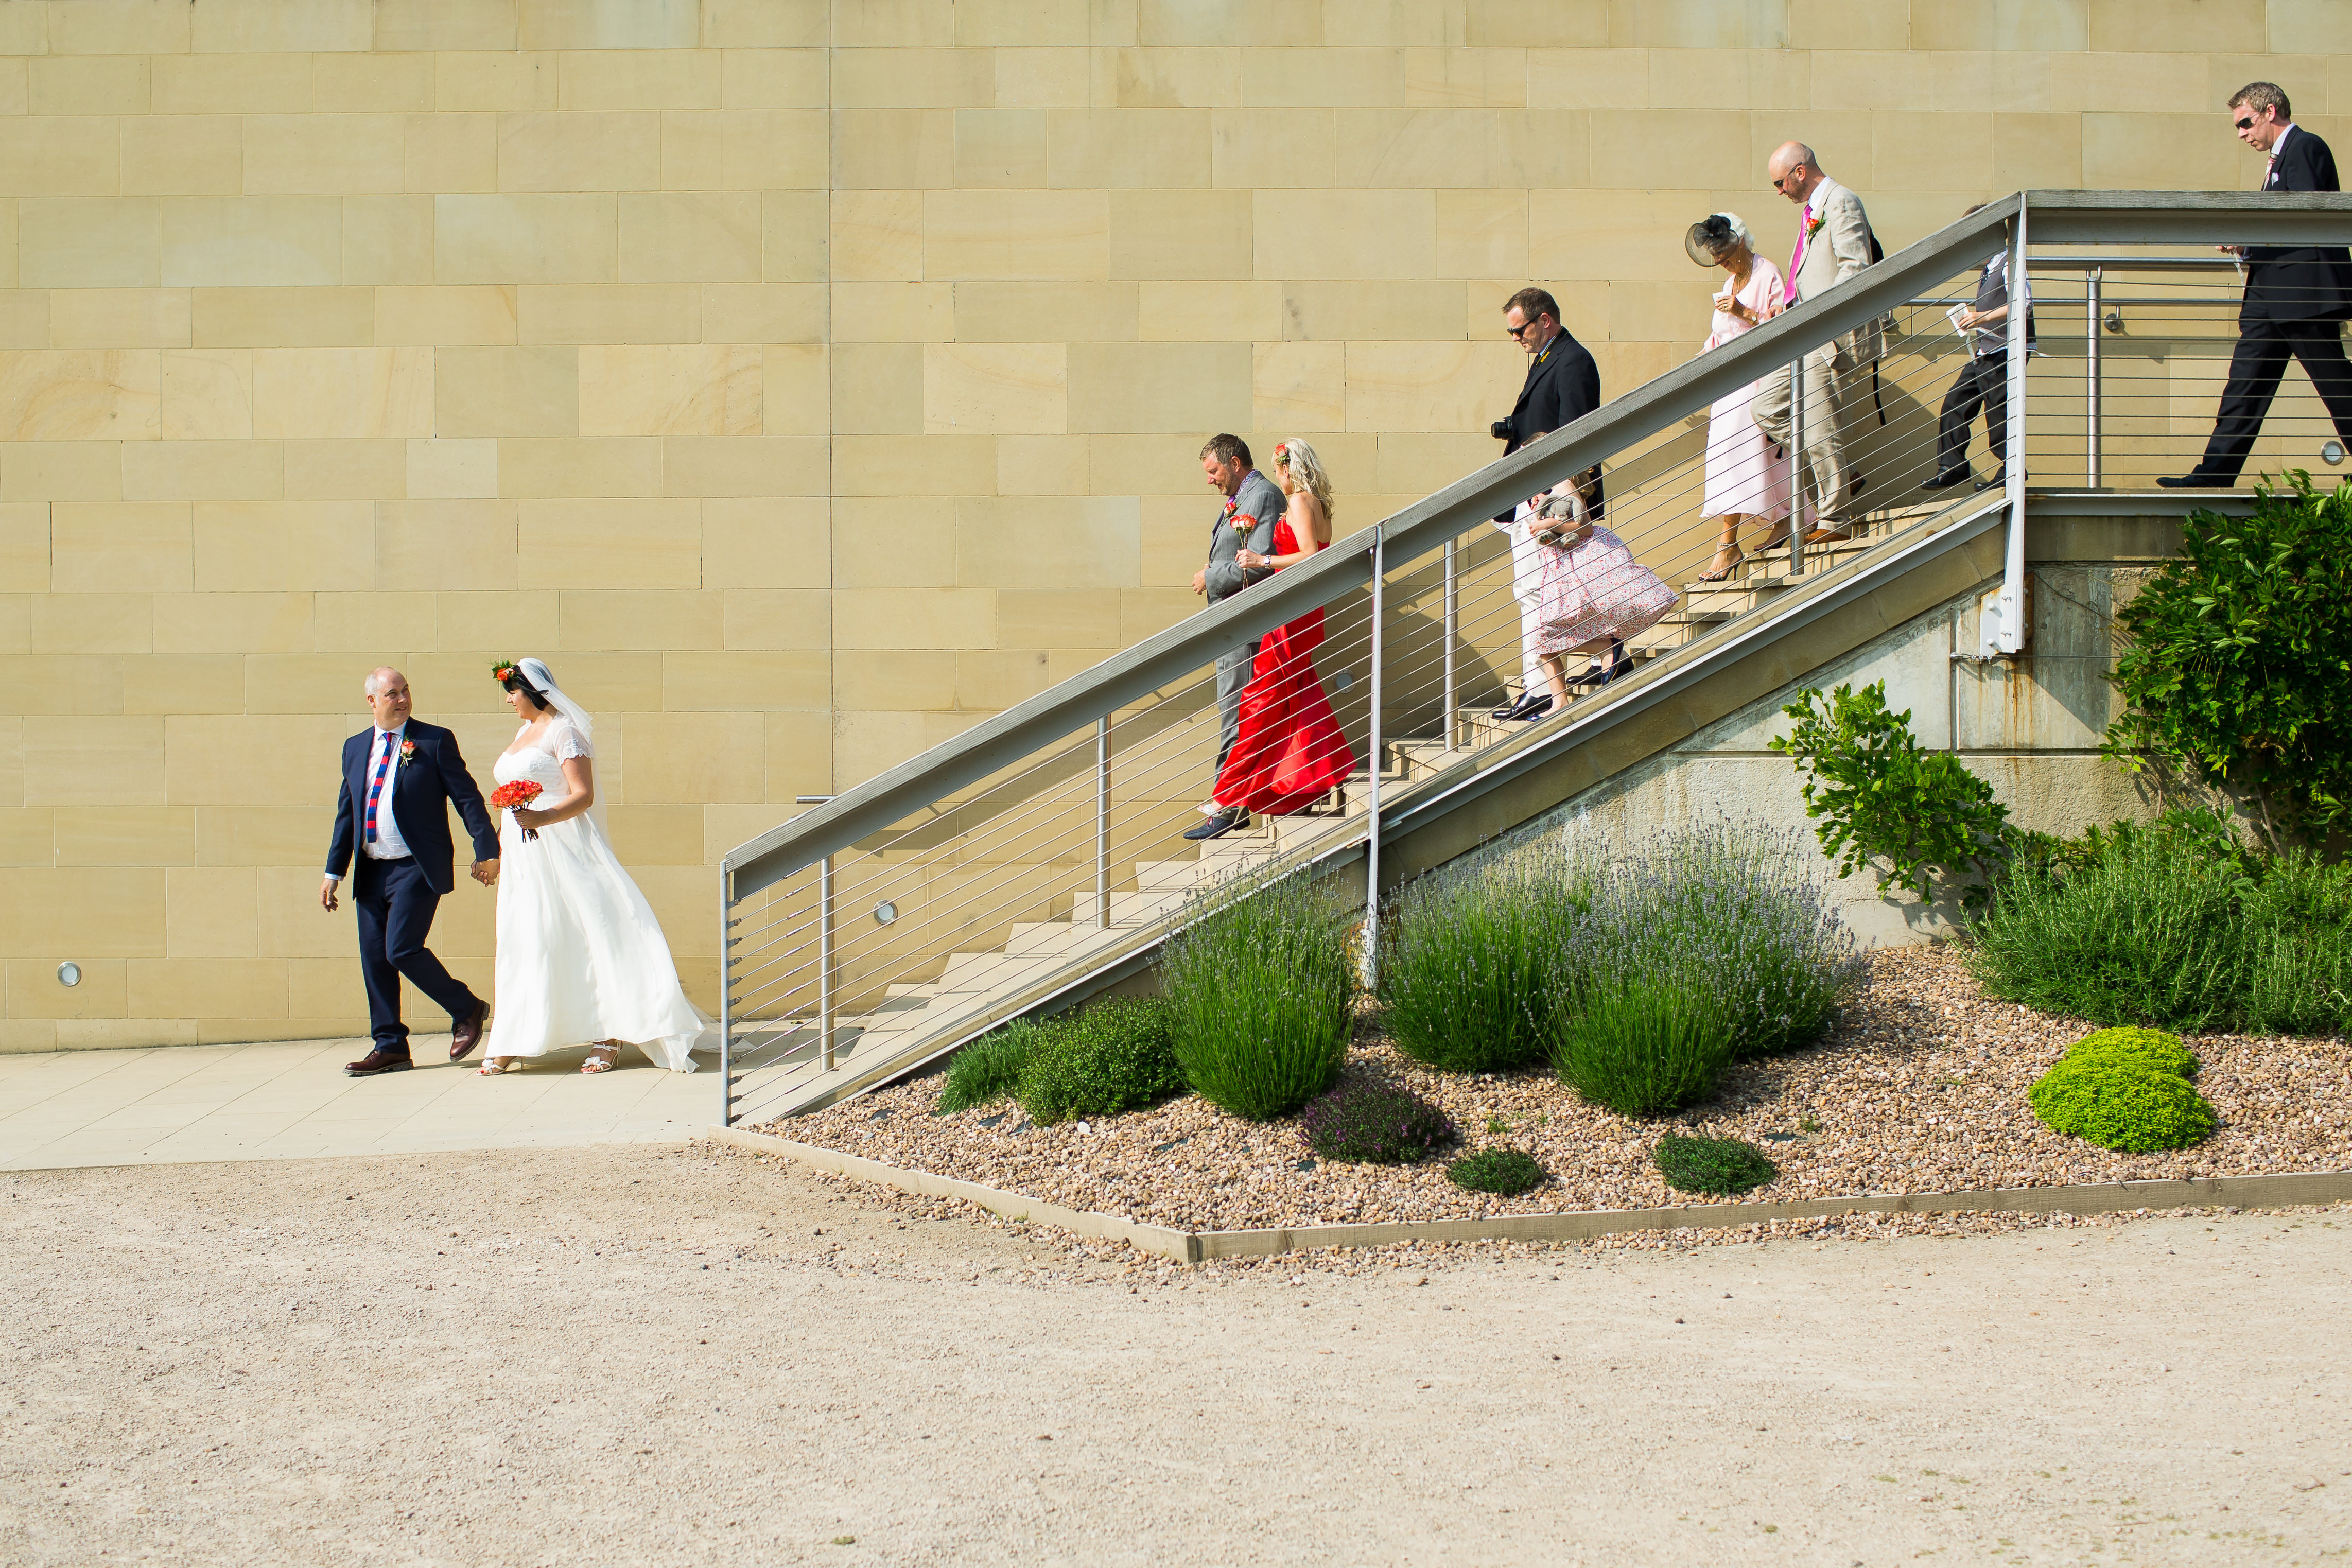 A wedding part, led by the bride and groom, walking down steps outside the Underground Gallery at YSP